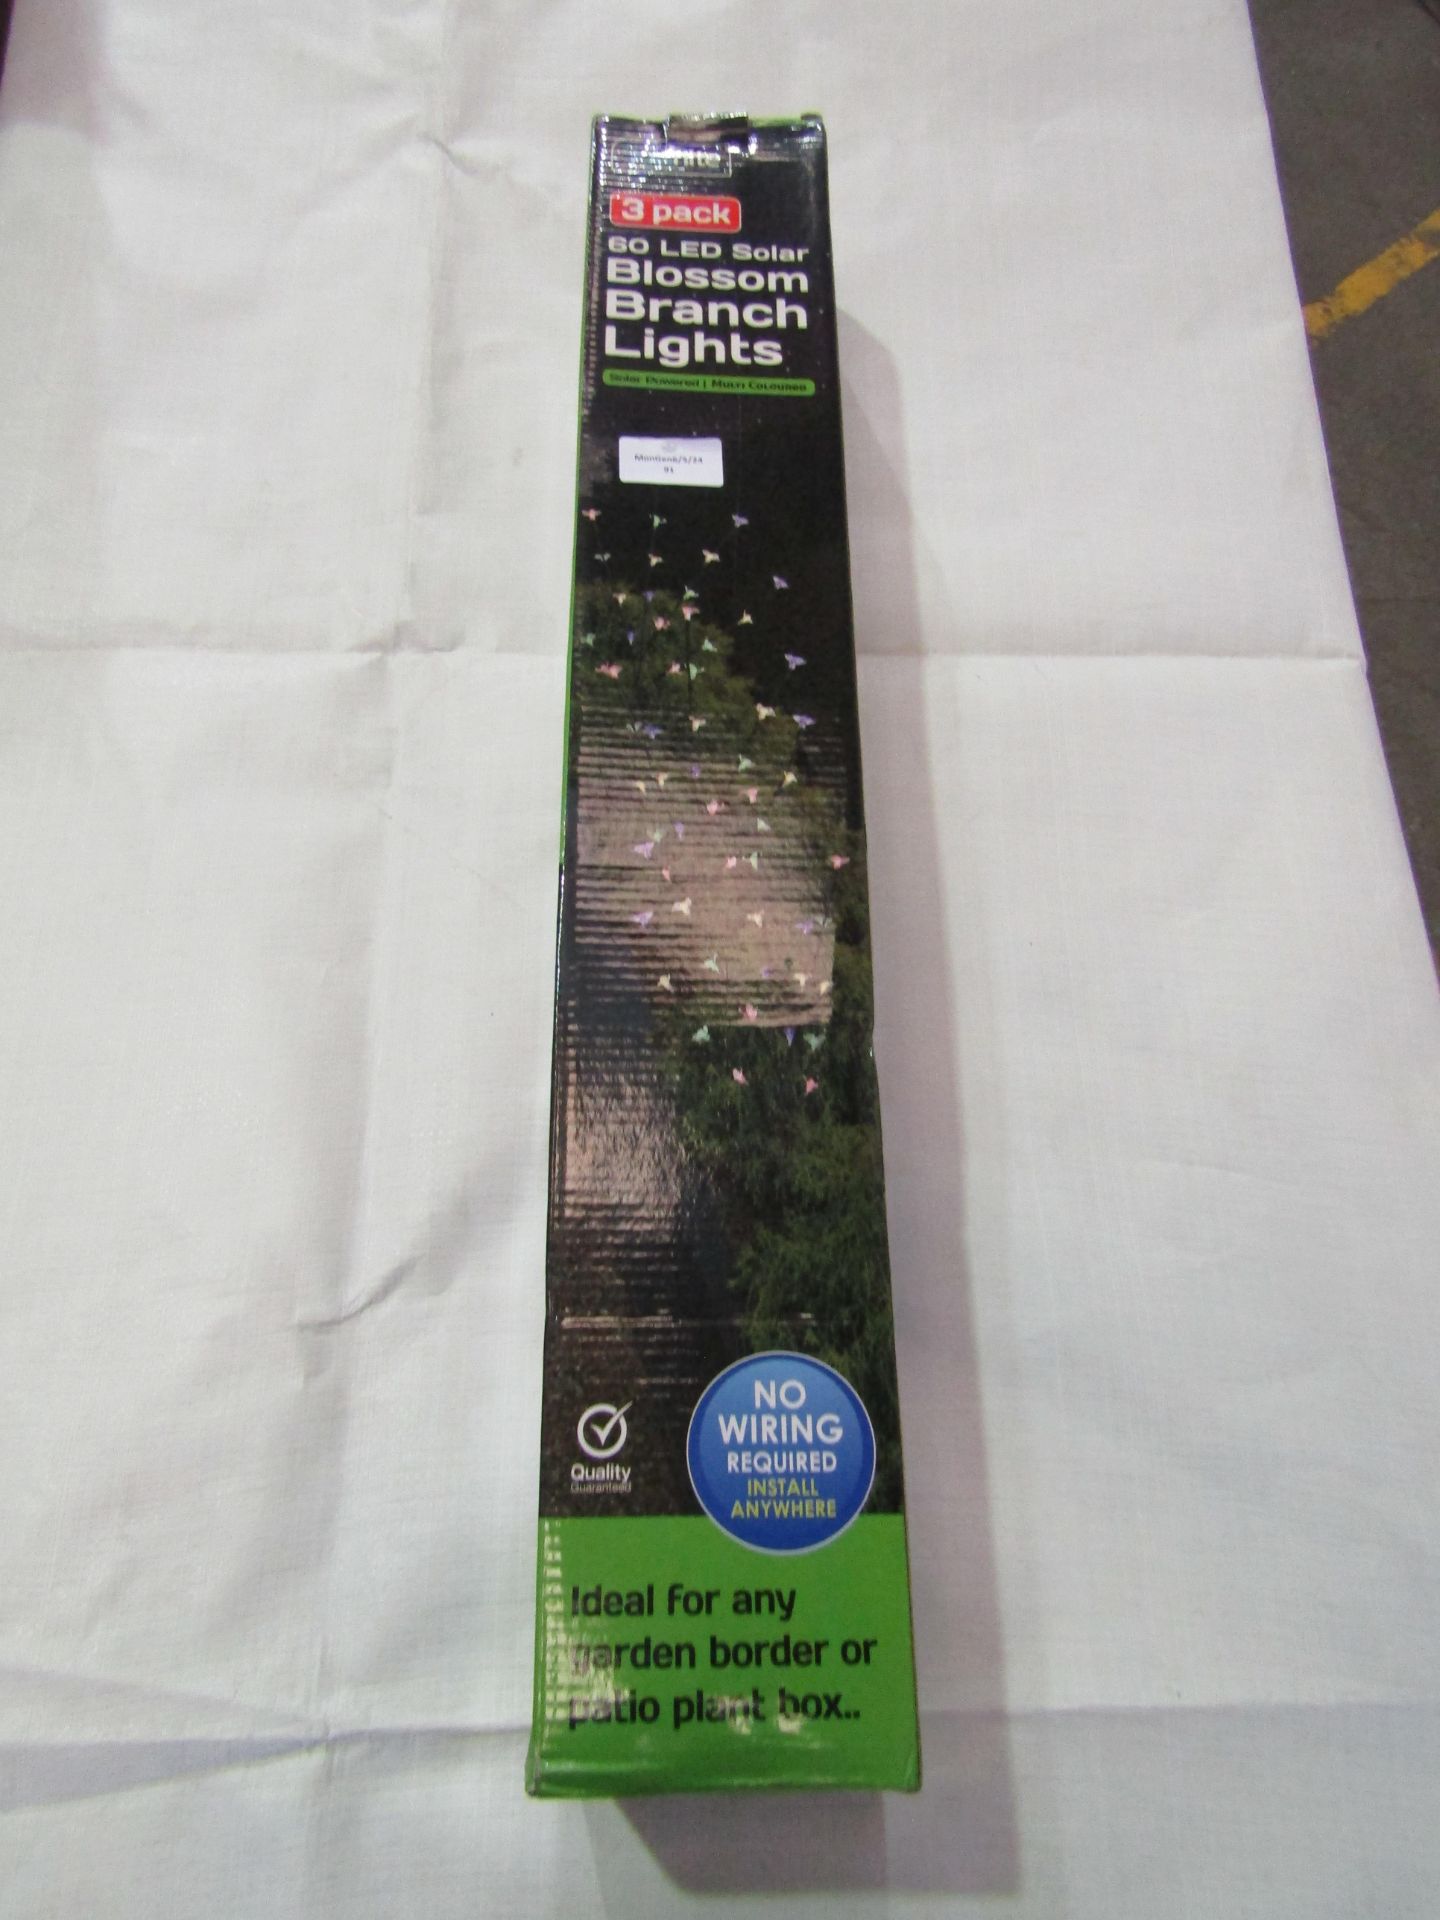 Solanite 3 Pack 60 LED Blossom Branch Lights - Unchecked & Boxed.